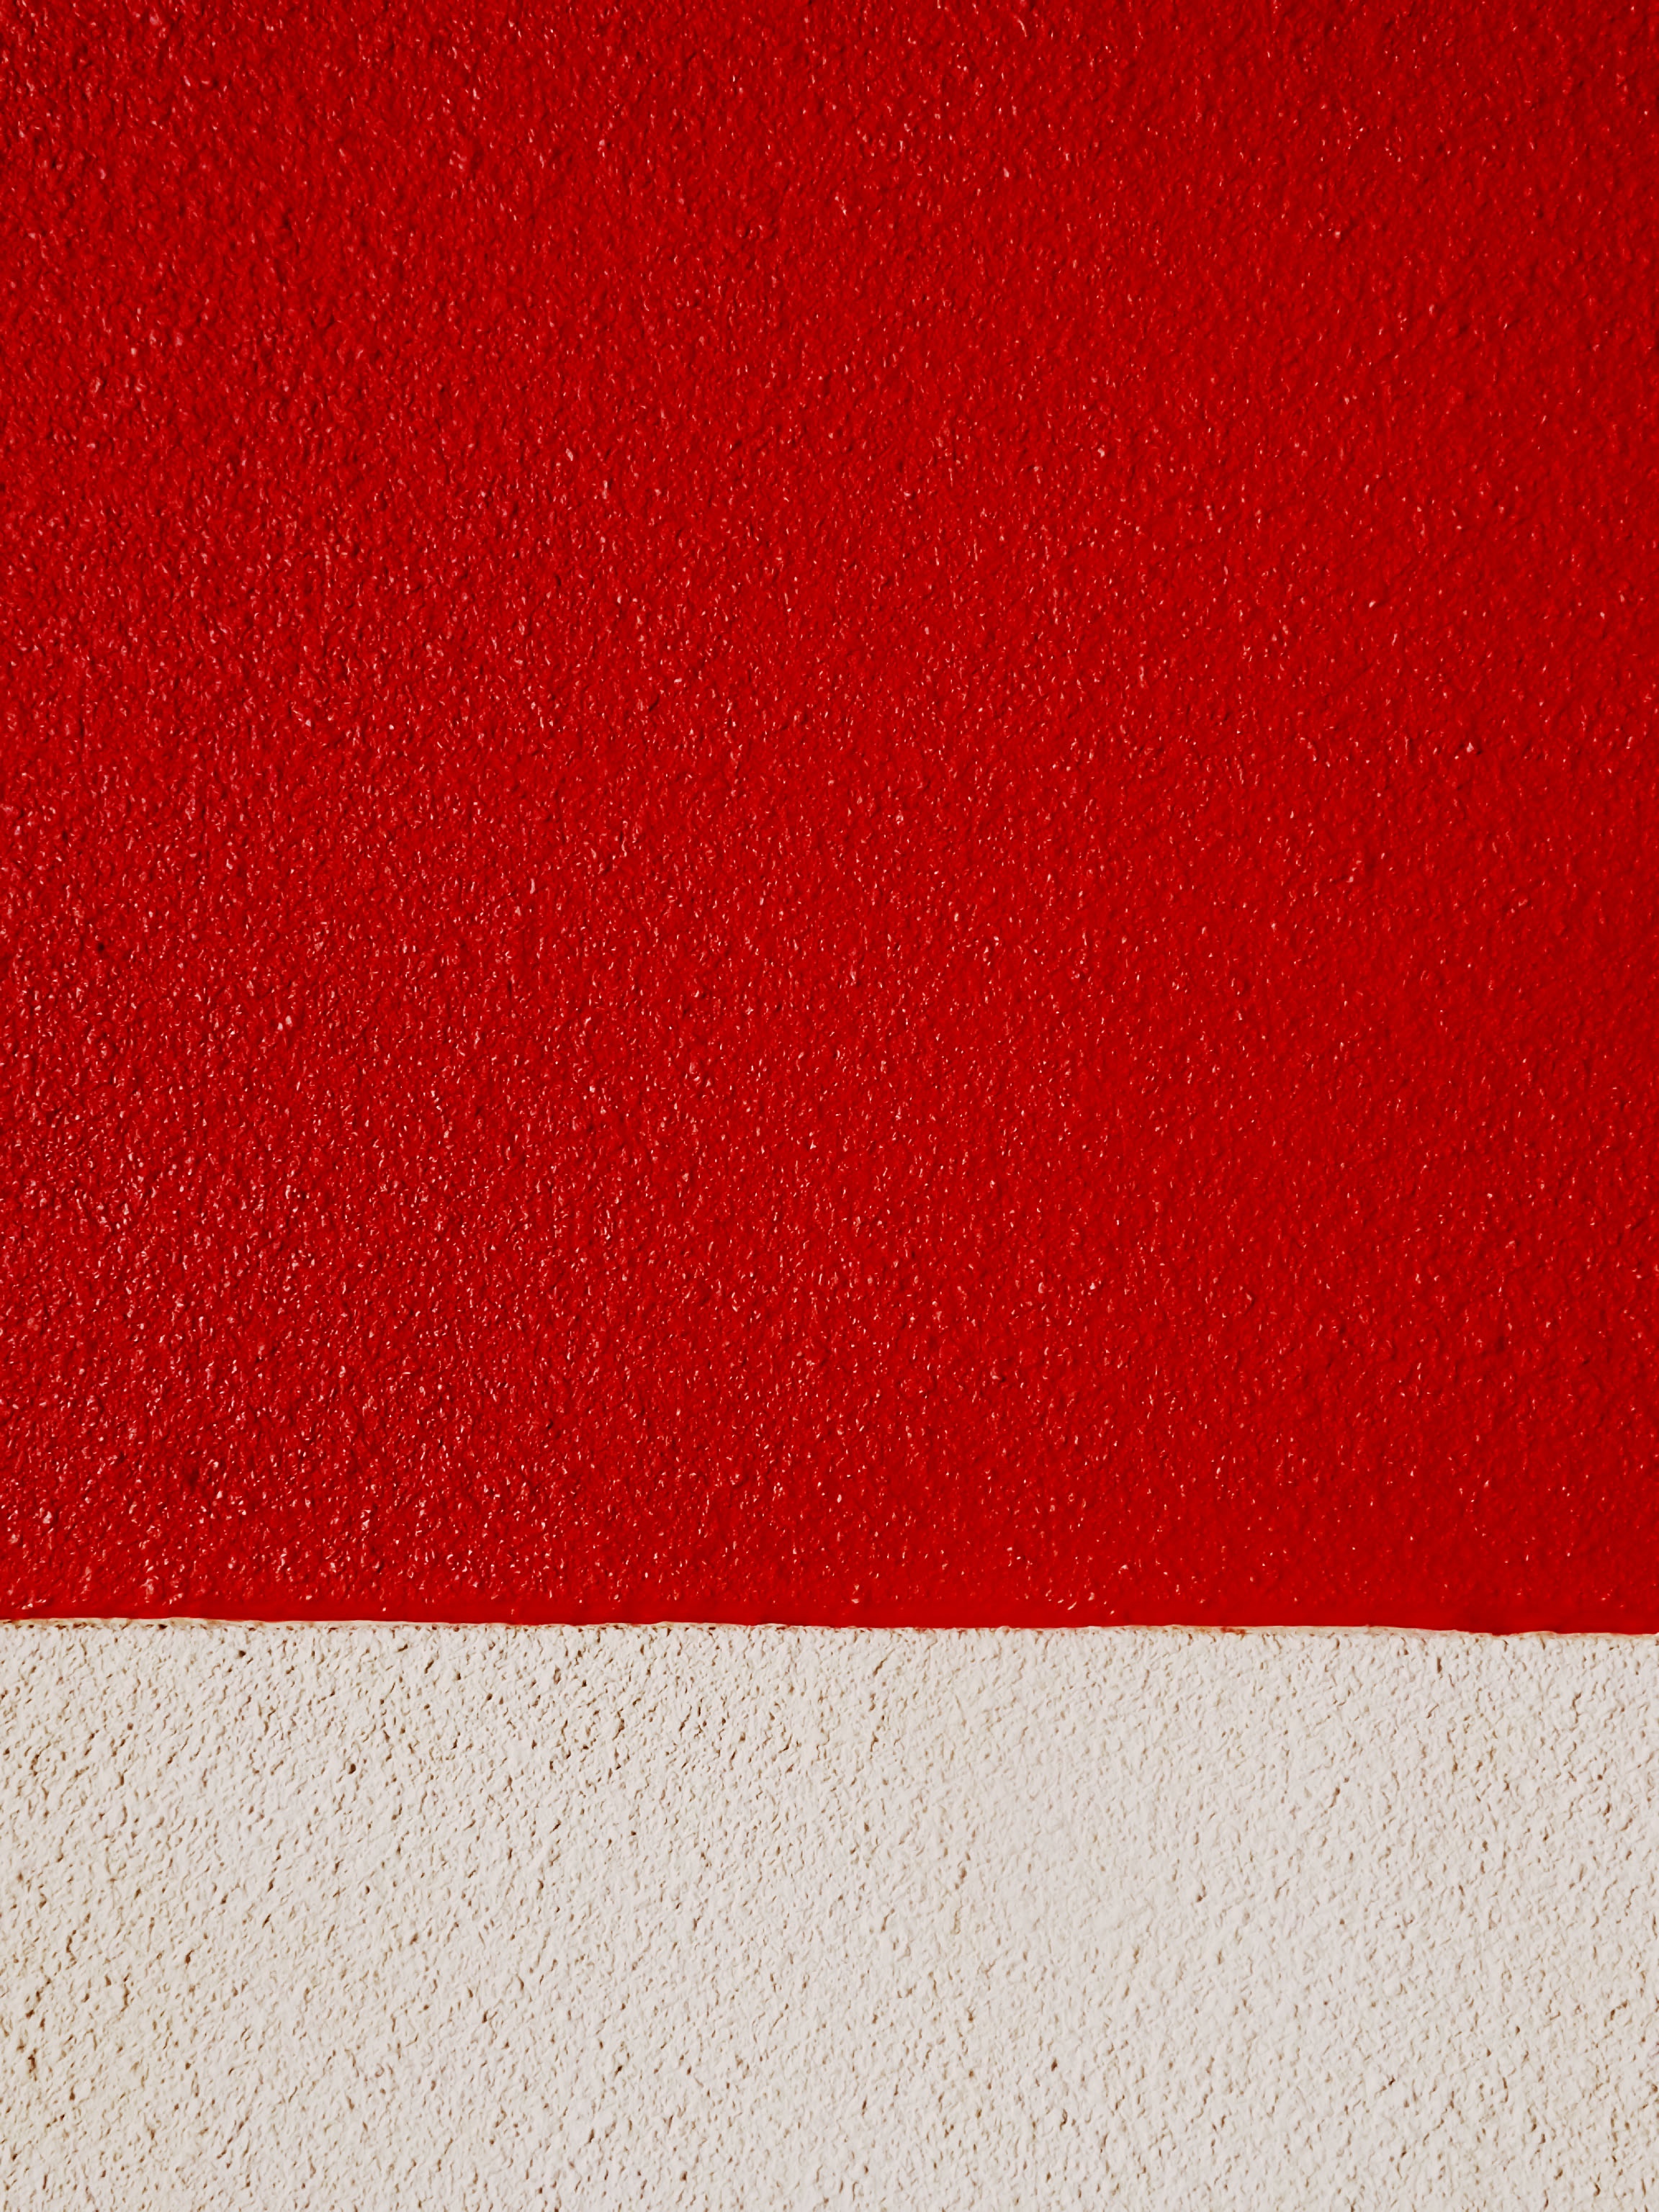 Windows Backgrounds texture, paint, red, textures, wall, rough